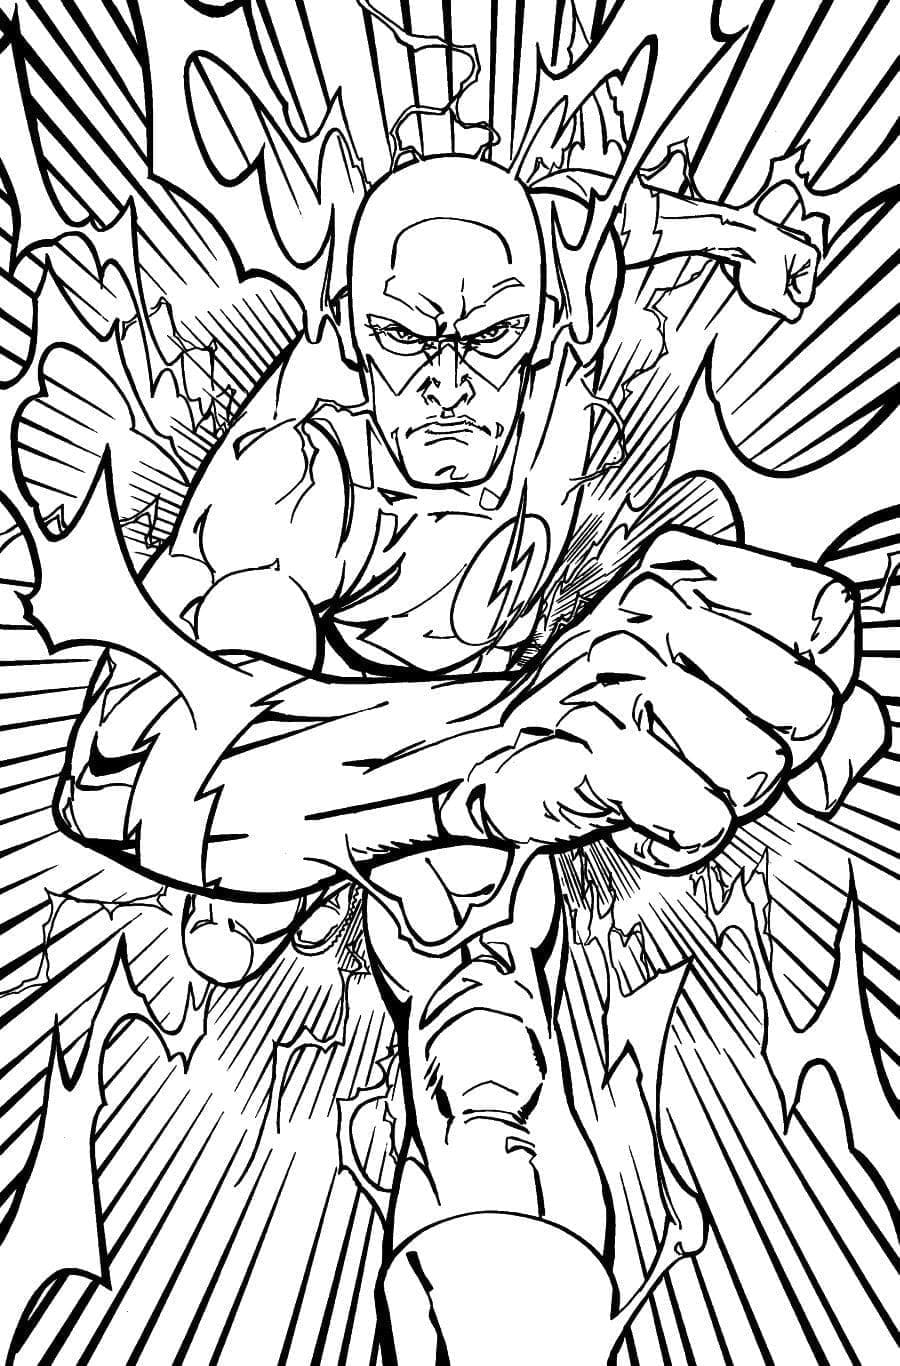 Incroyable Flash coloring page